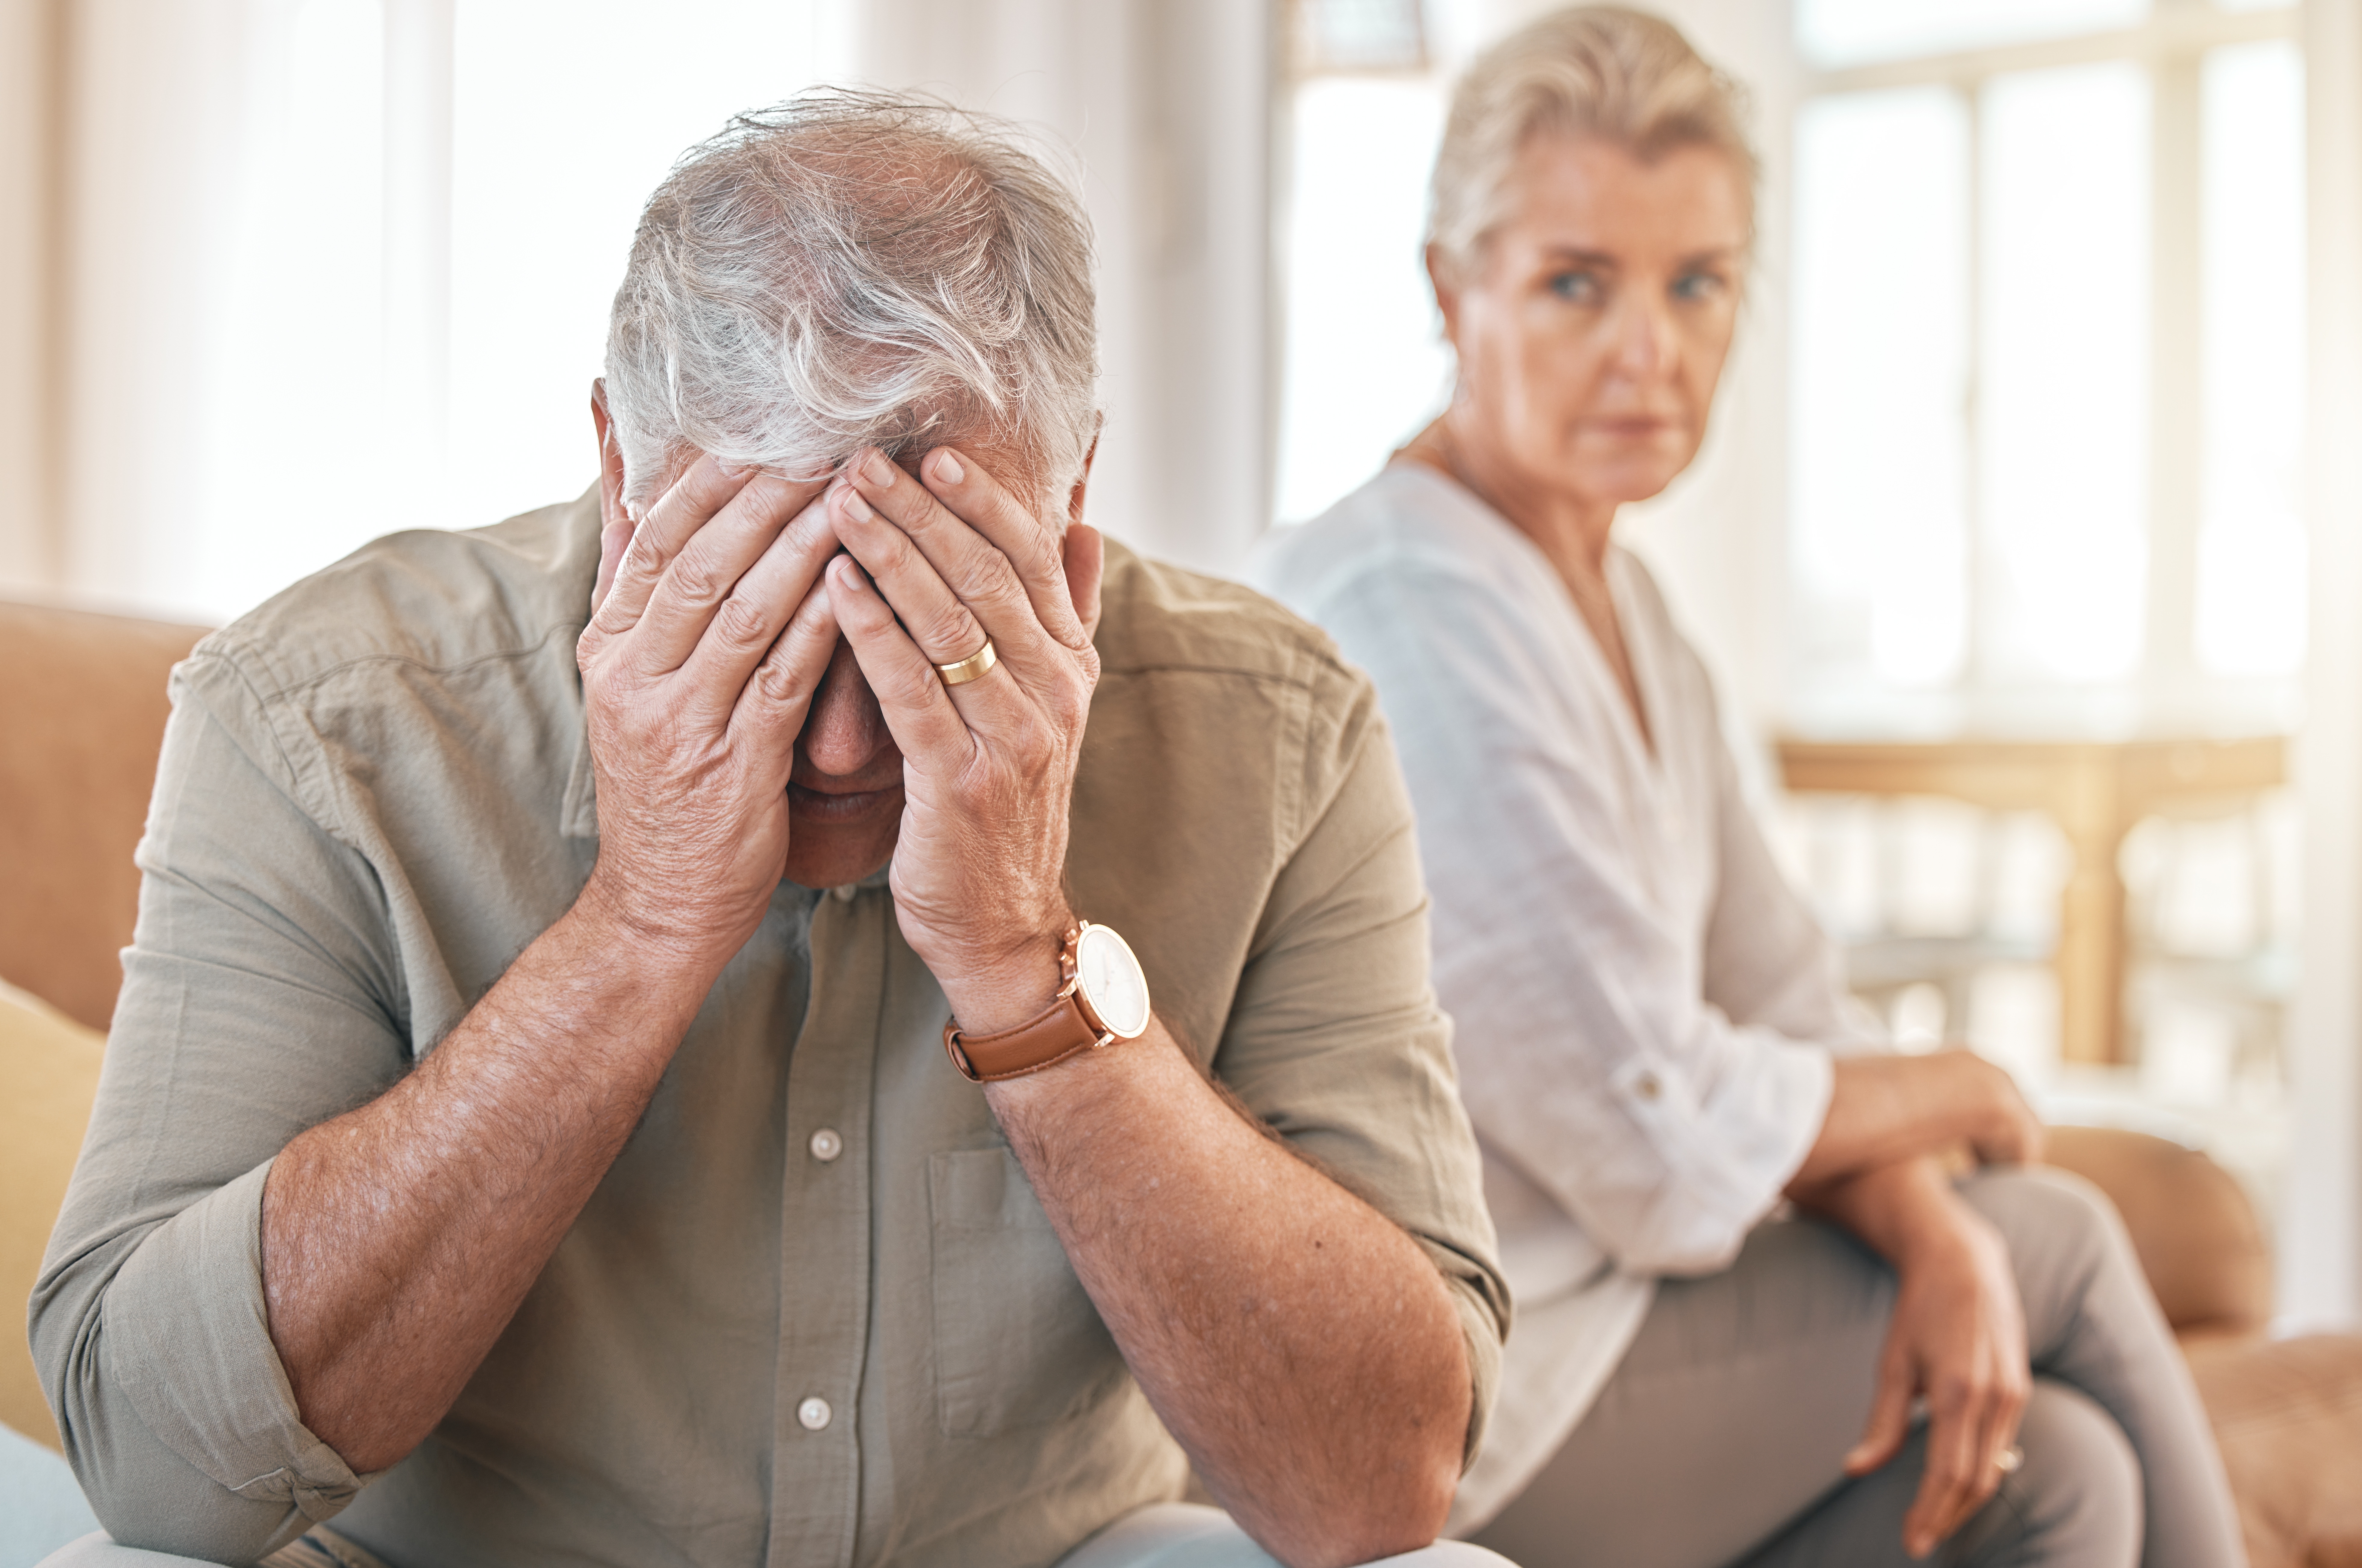 Senior couple sitting apart after a major conflict | Source: Shutterstock